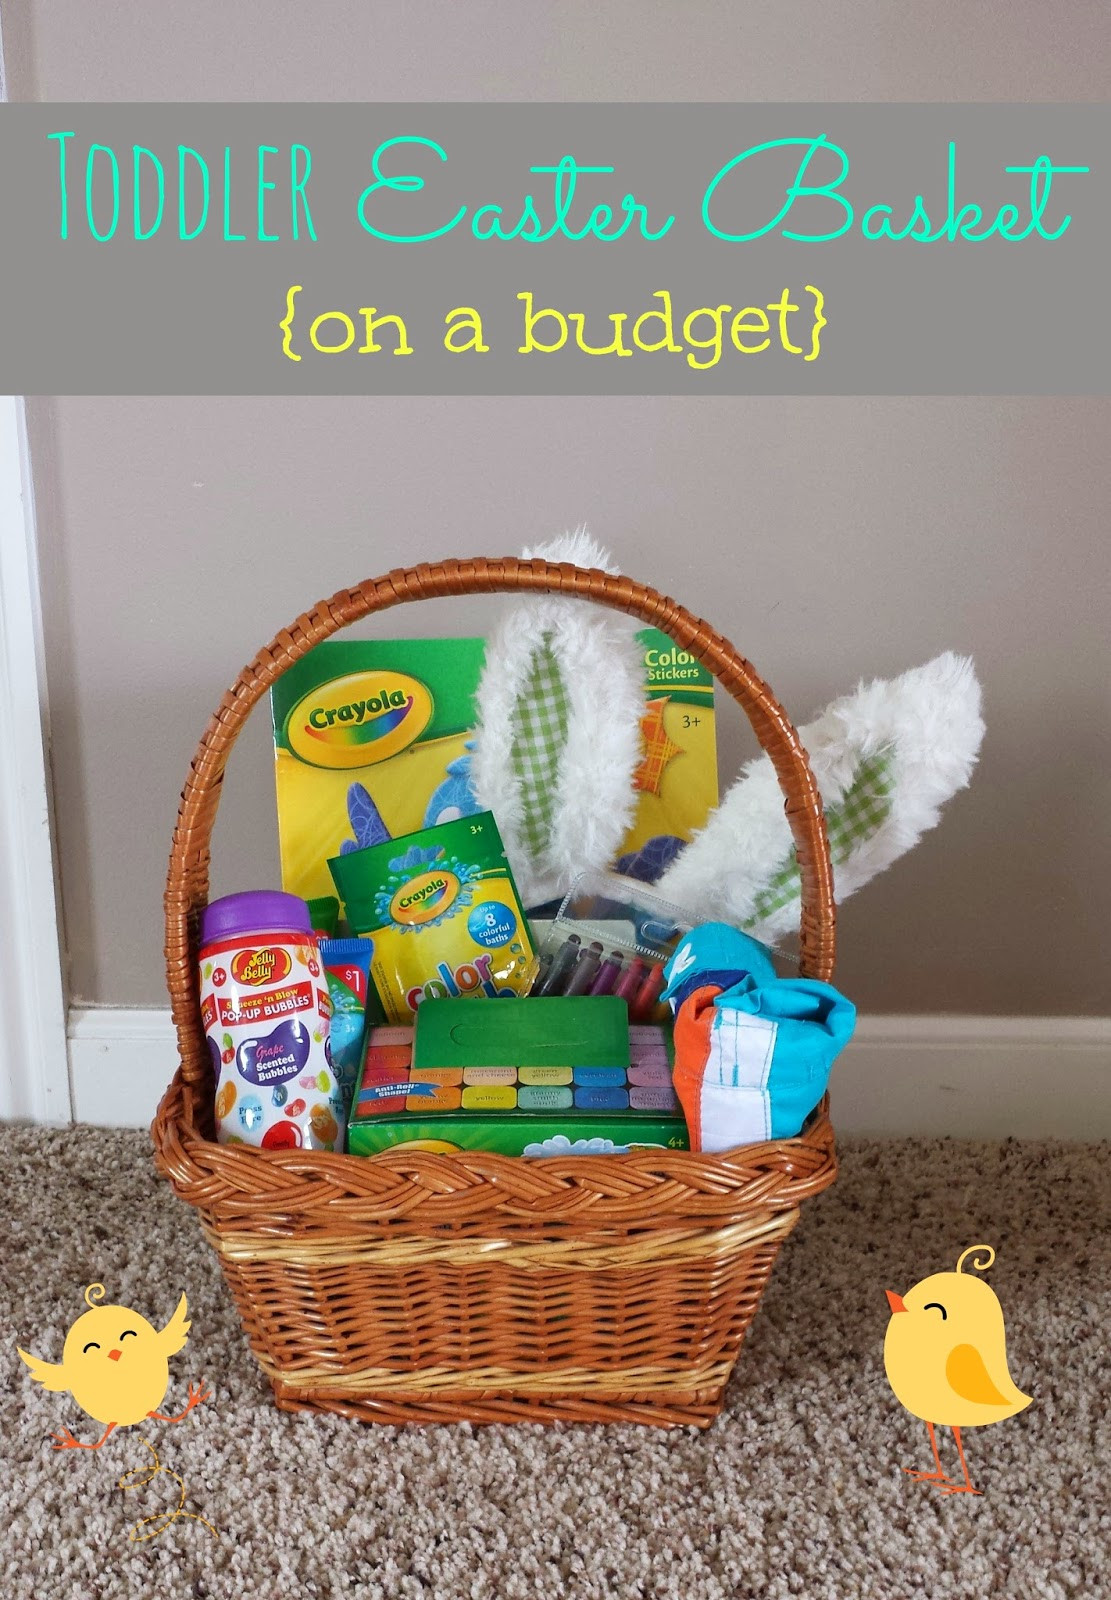 Toddler Easter Baskets Ideas
 Simple Suburbia Toddler Easter Basket Ideas